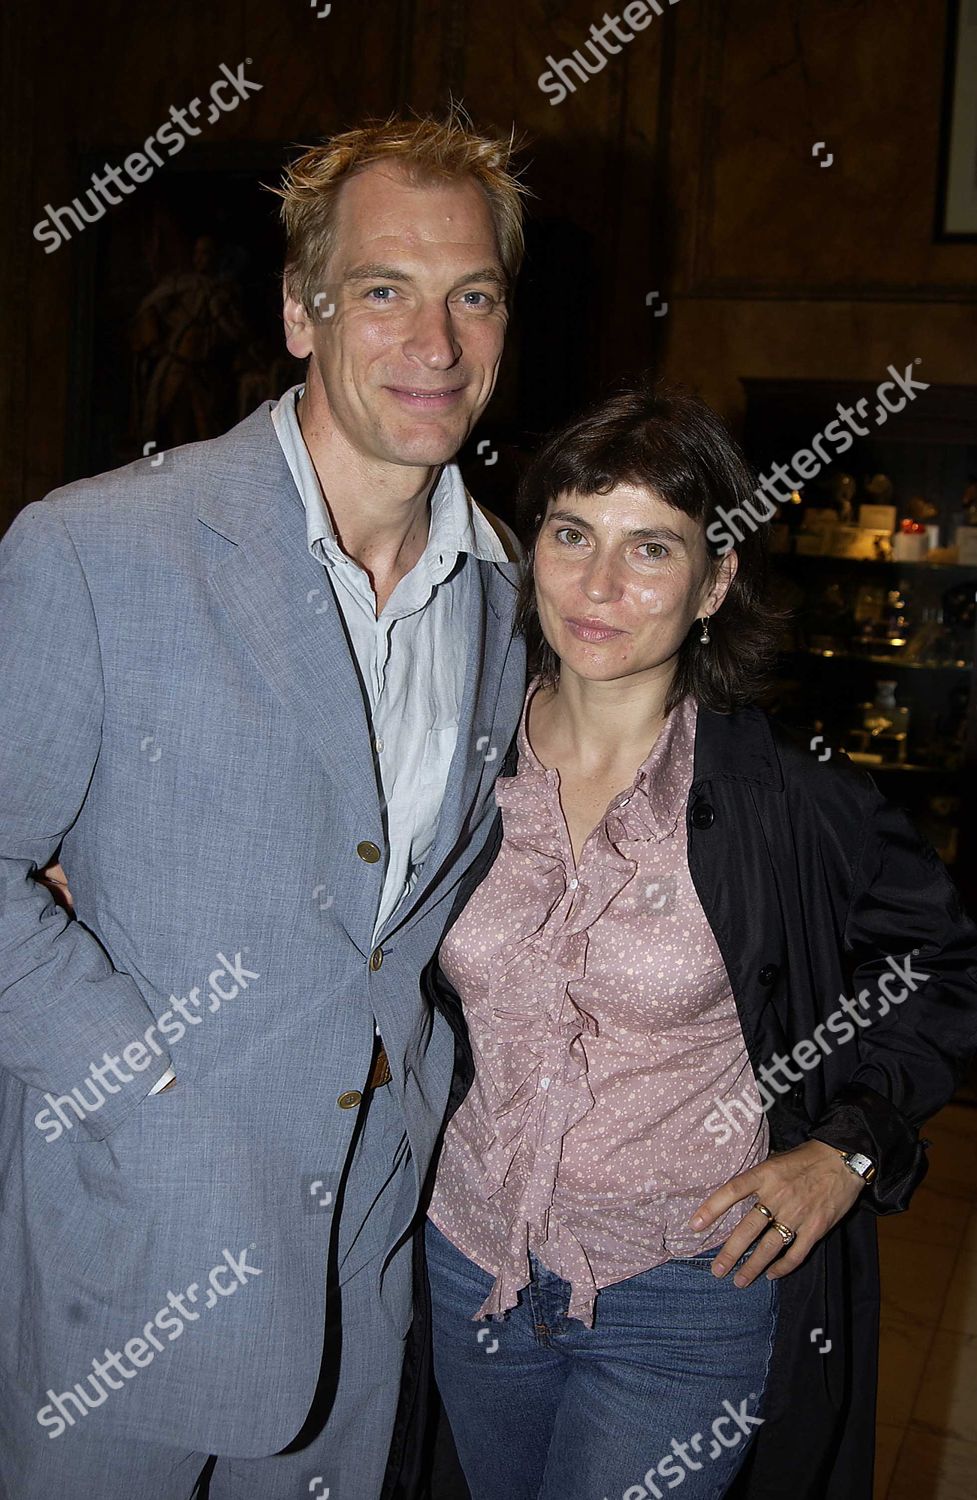 Who is Julian Sands' wife Evgenia Citkowitz and do they have any